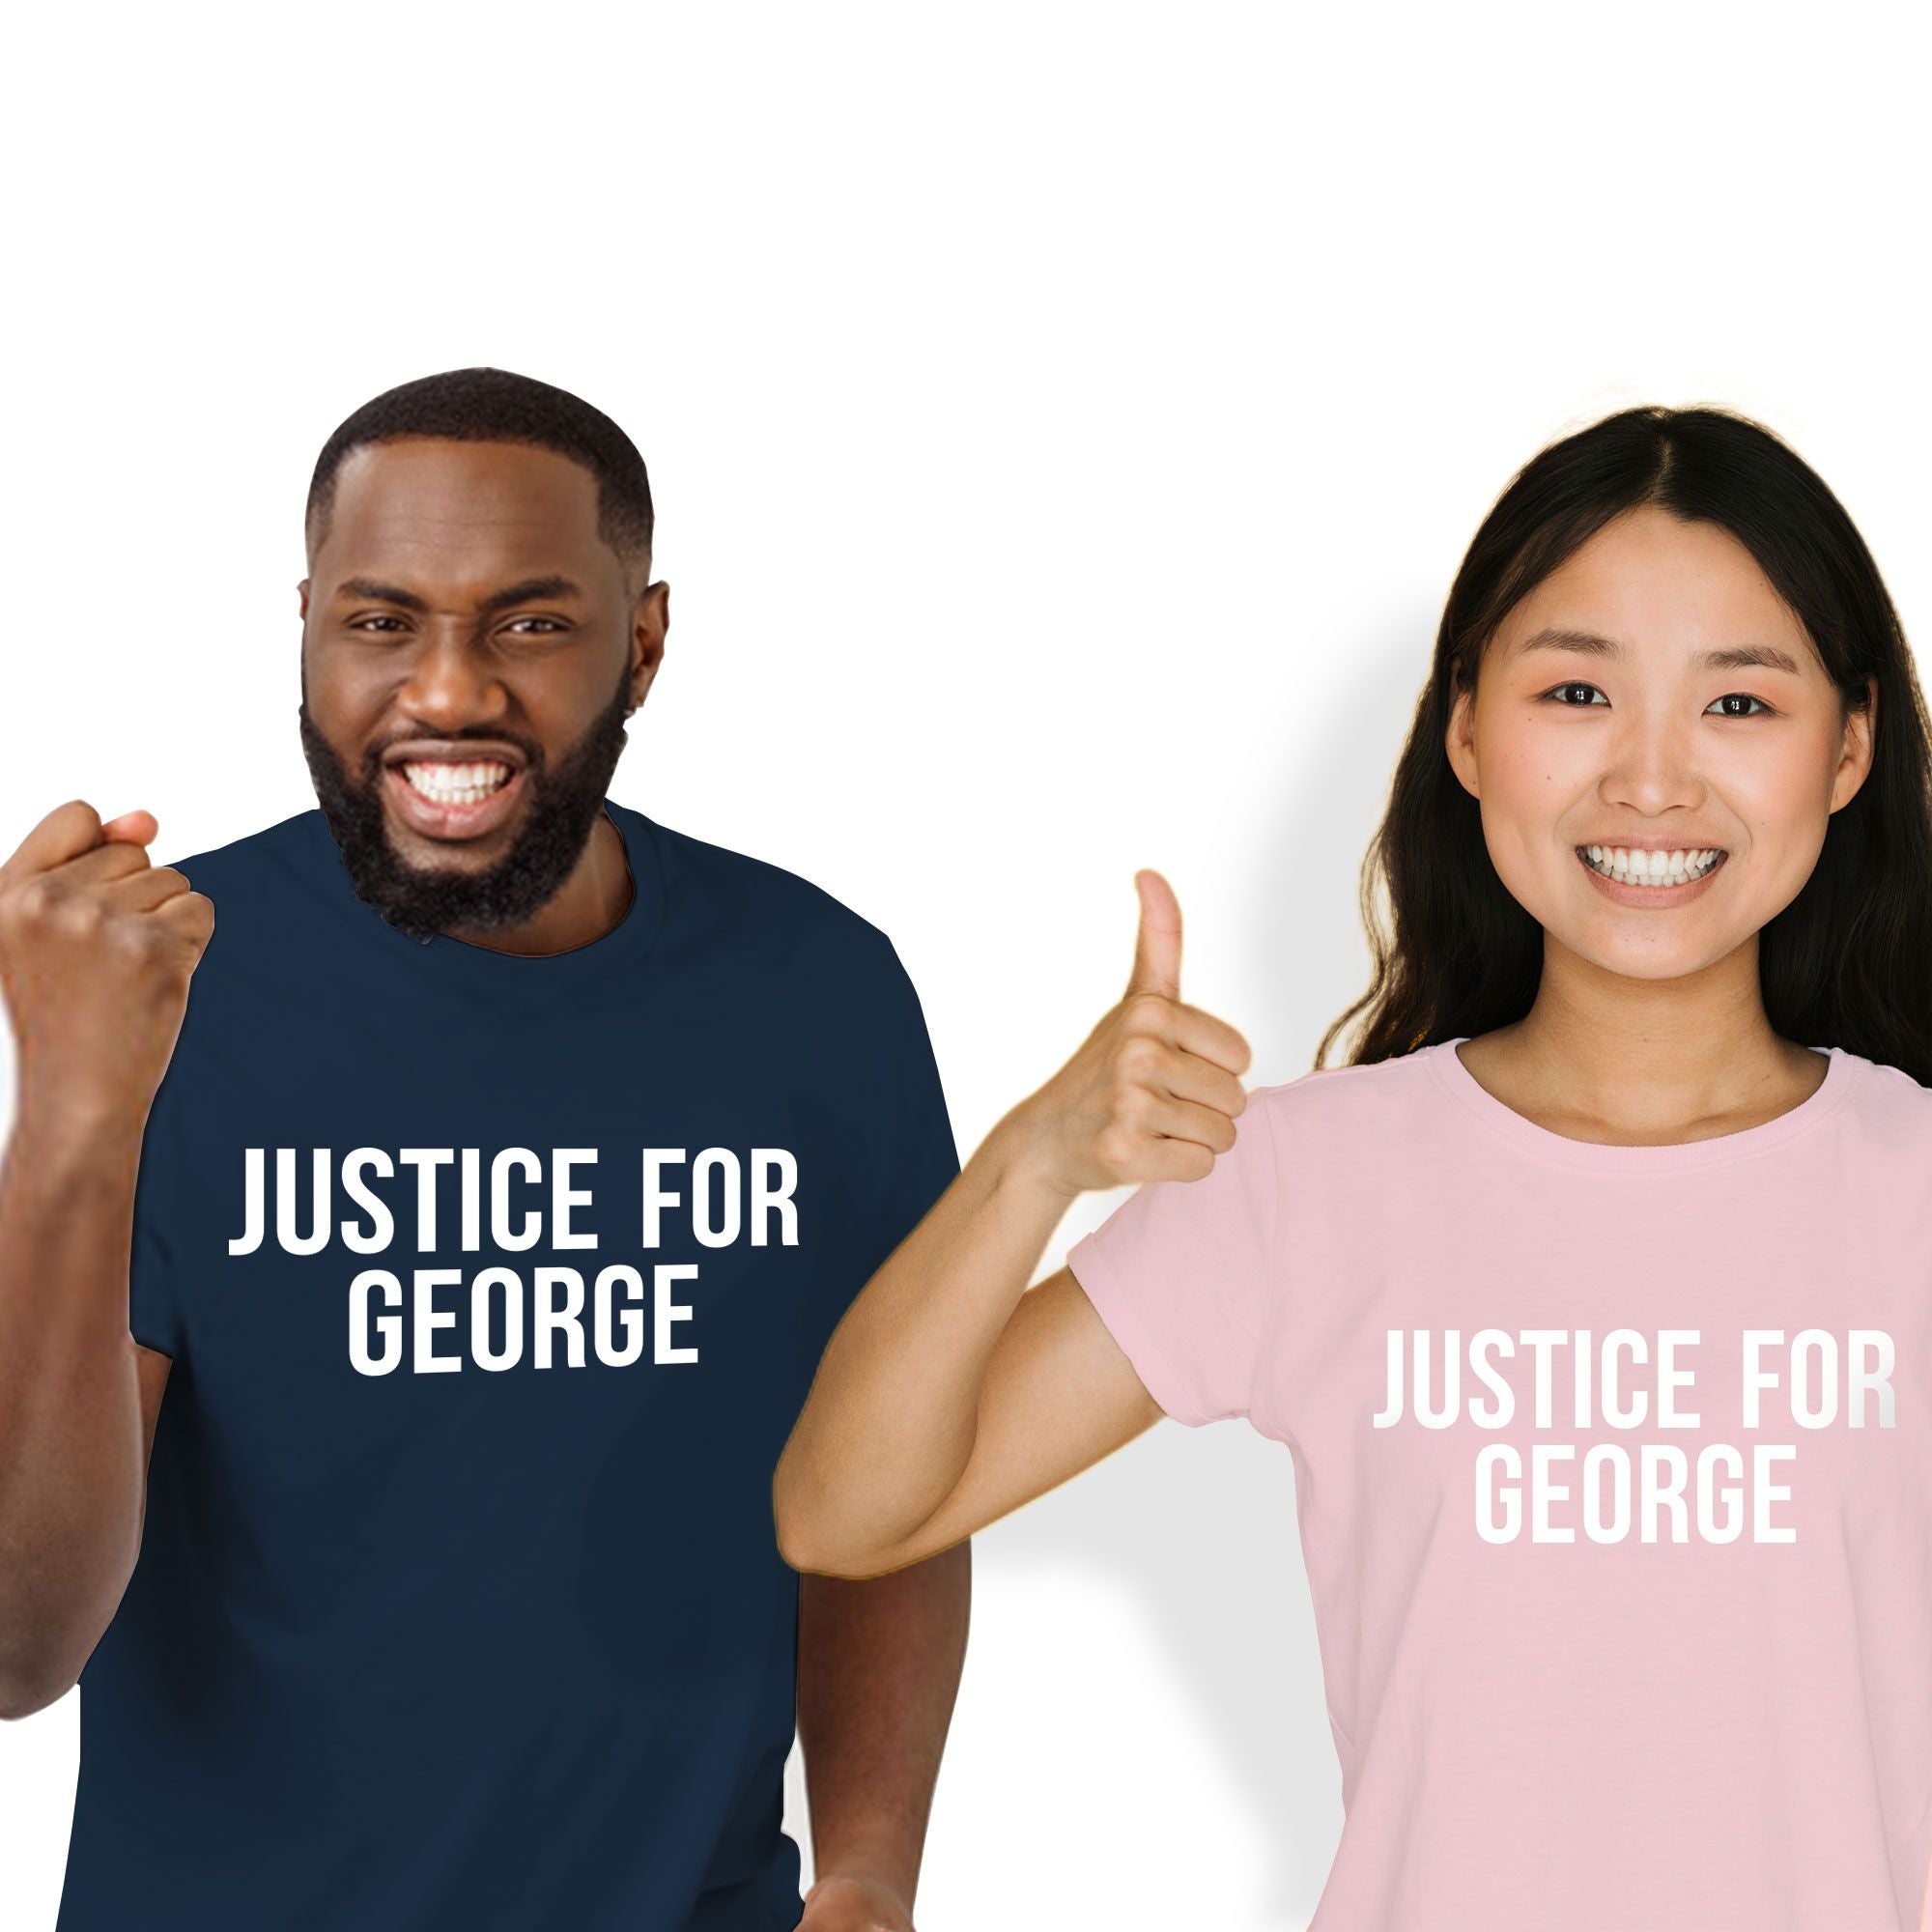 JUSTICE FOR GEORGE